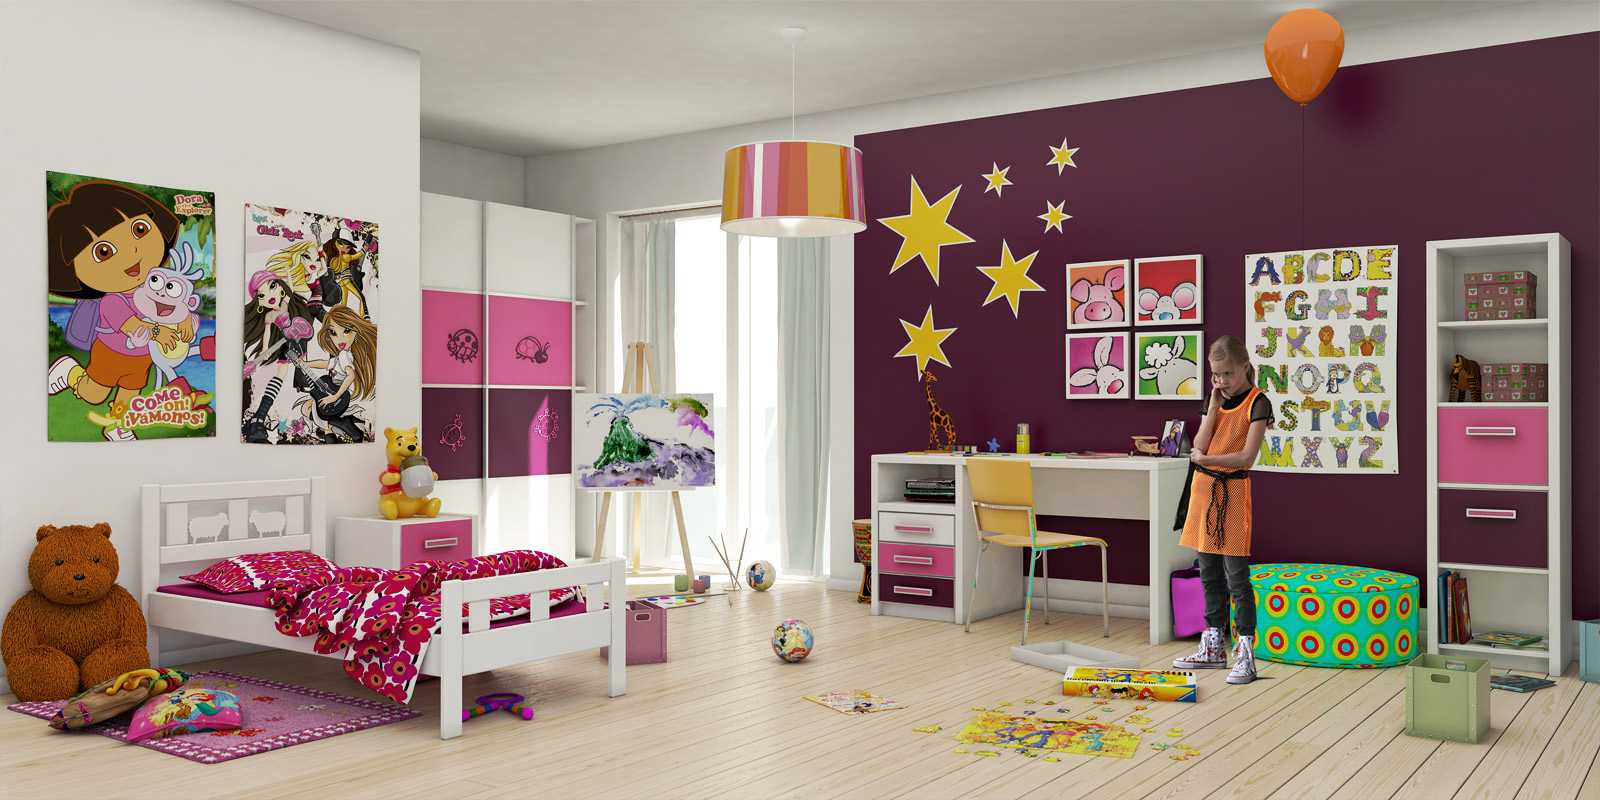 the idea of ​​a beautiful bedroom design for a girl